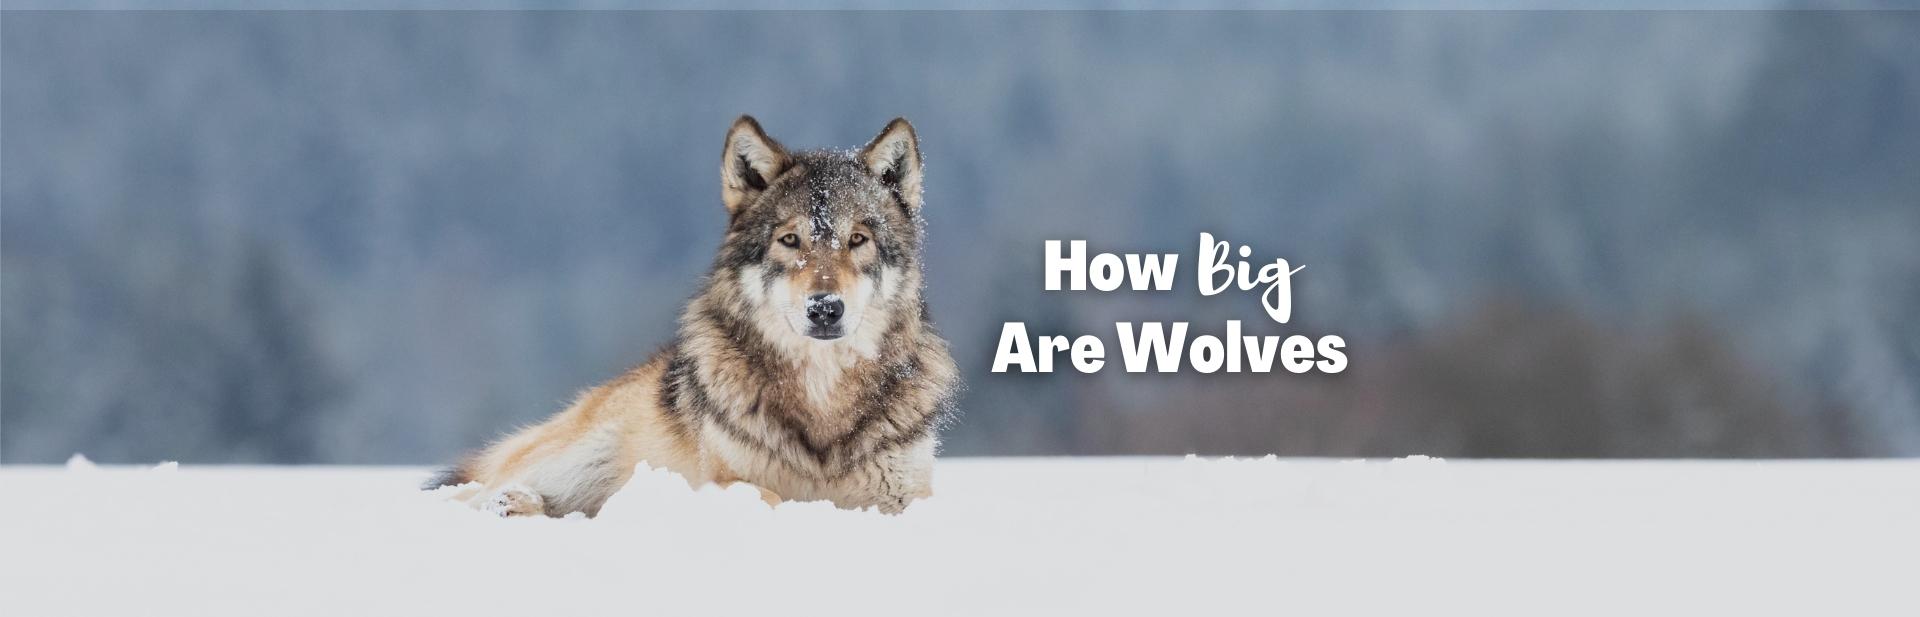 How Big Are Wolves? Meet the World’s Largest Canine